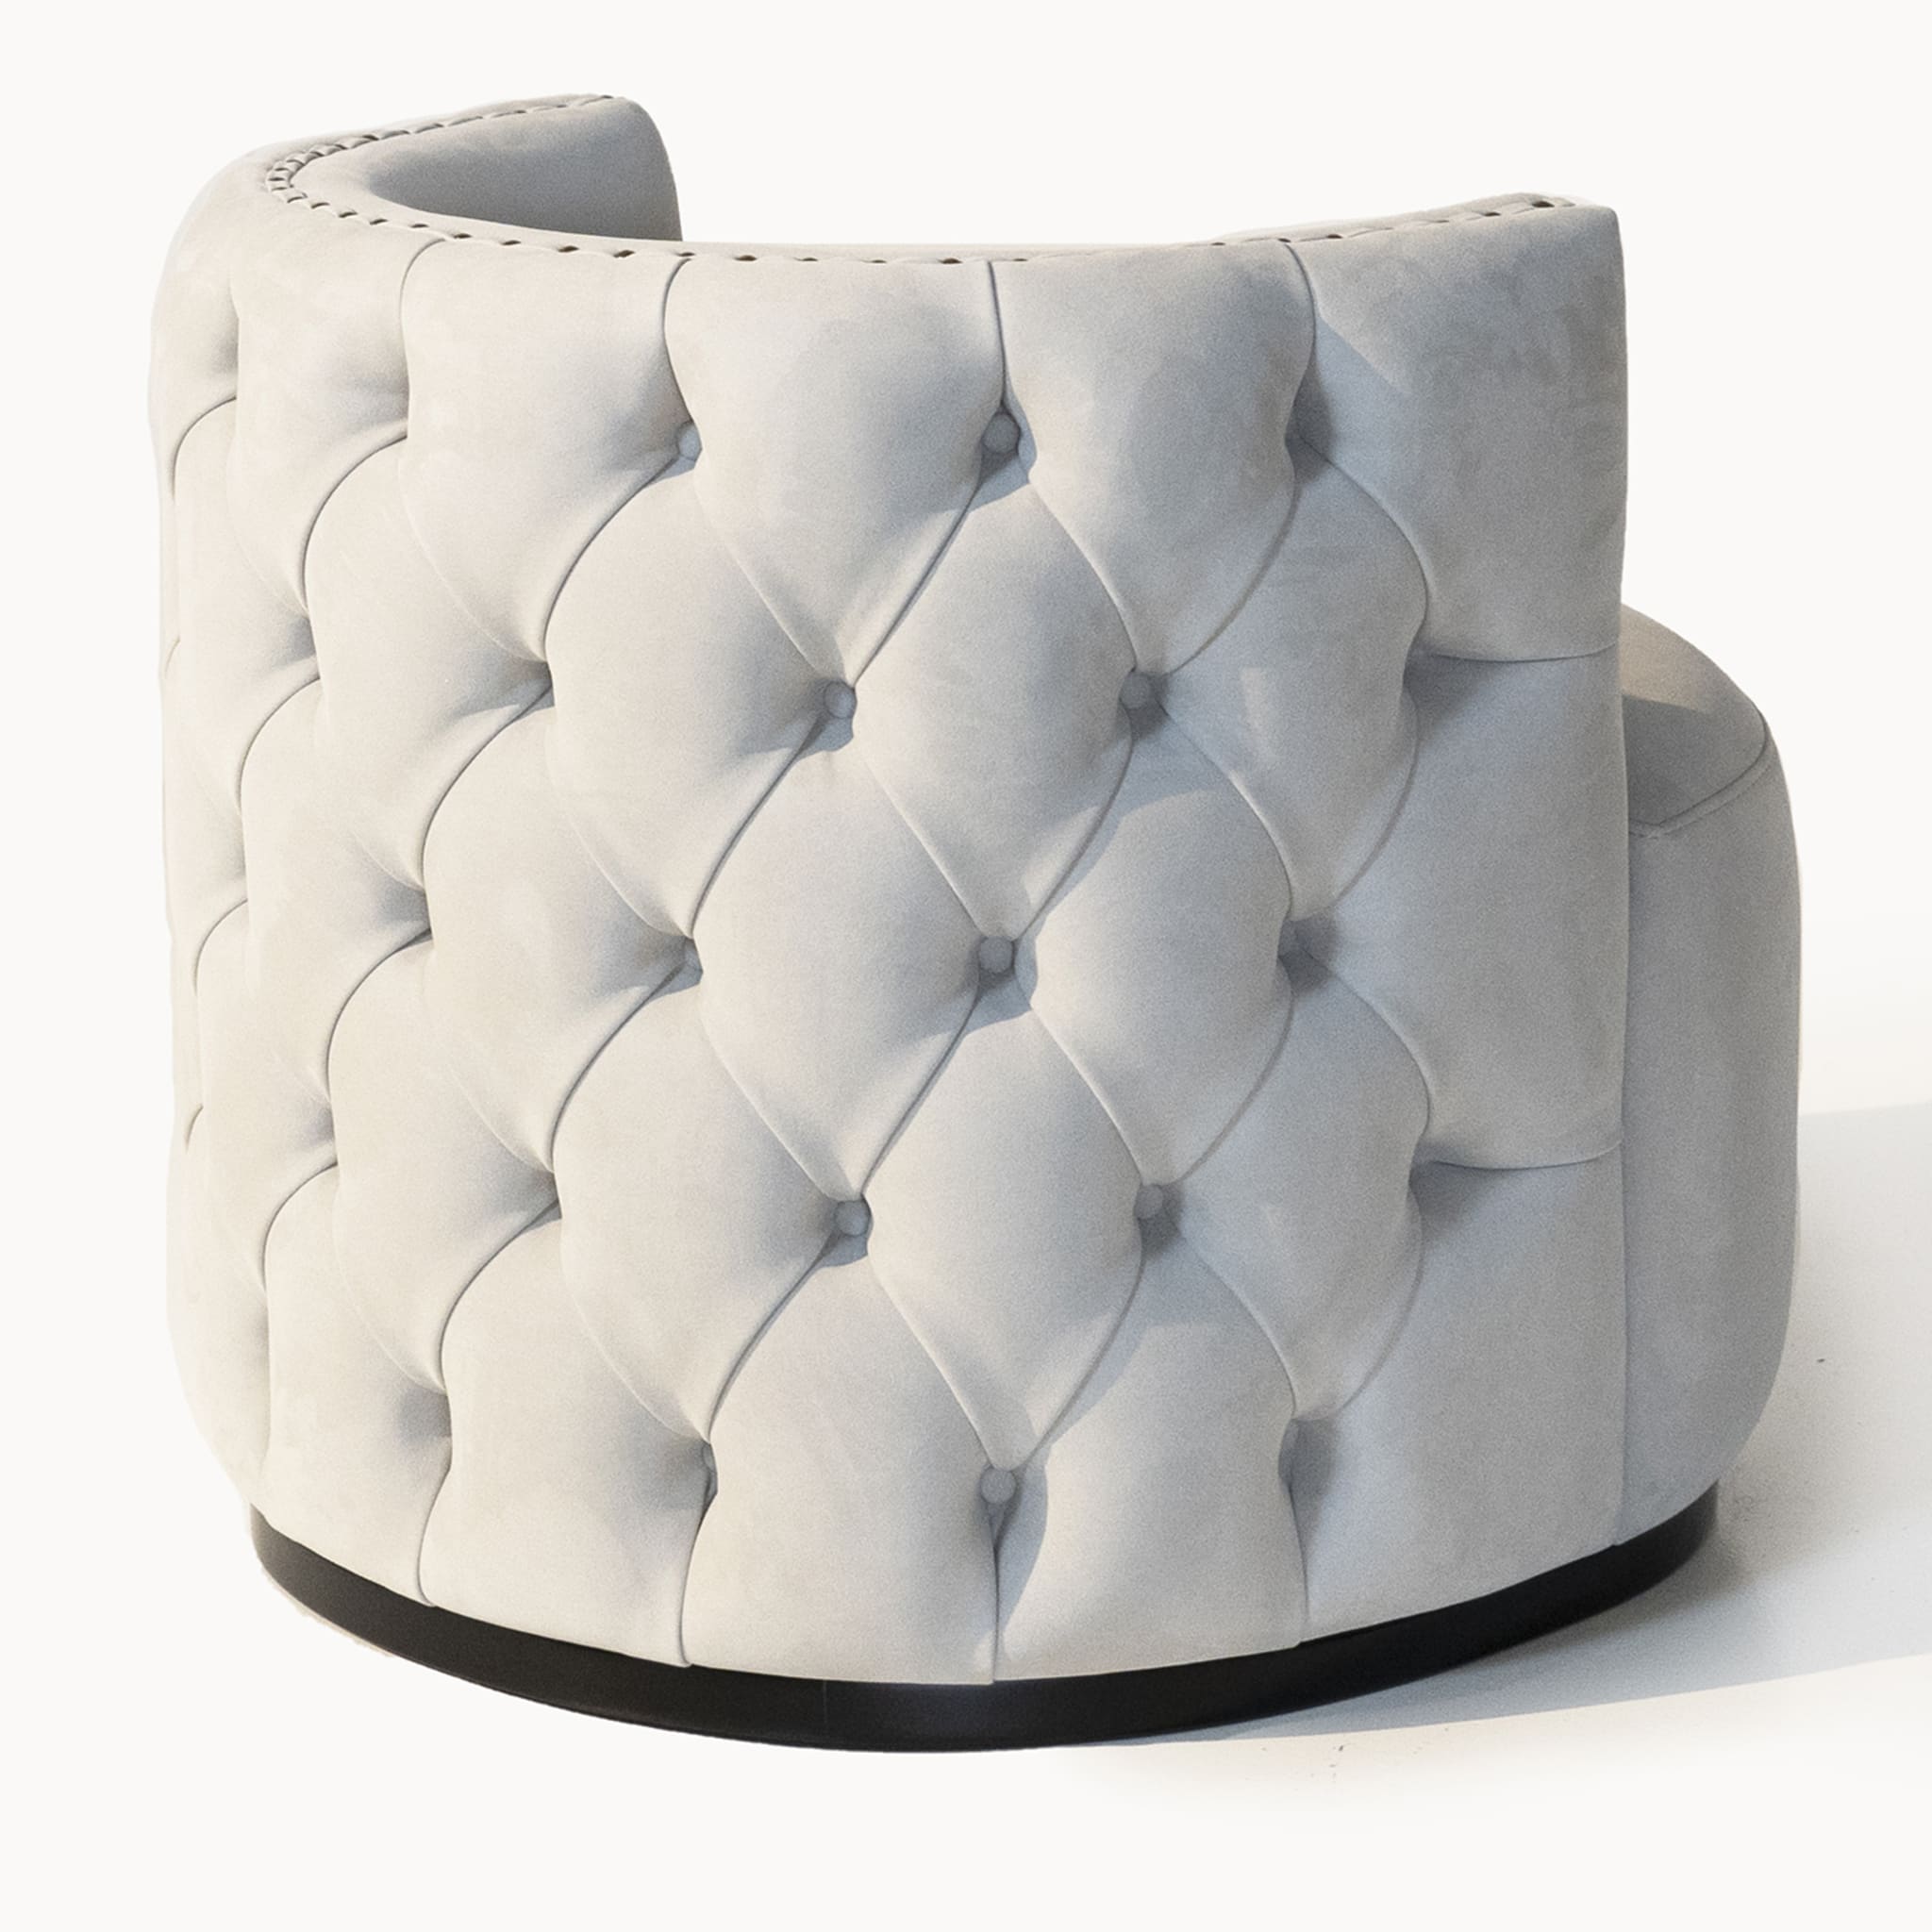 Petra Armchair by Marco and Giulio Mantellassi - Alternative view 2